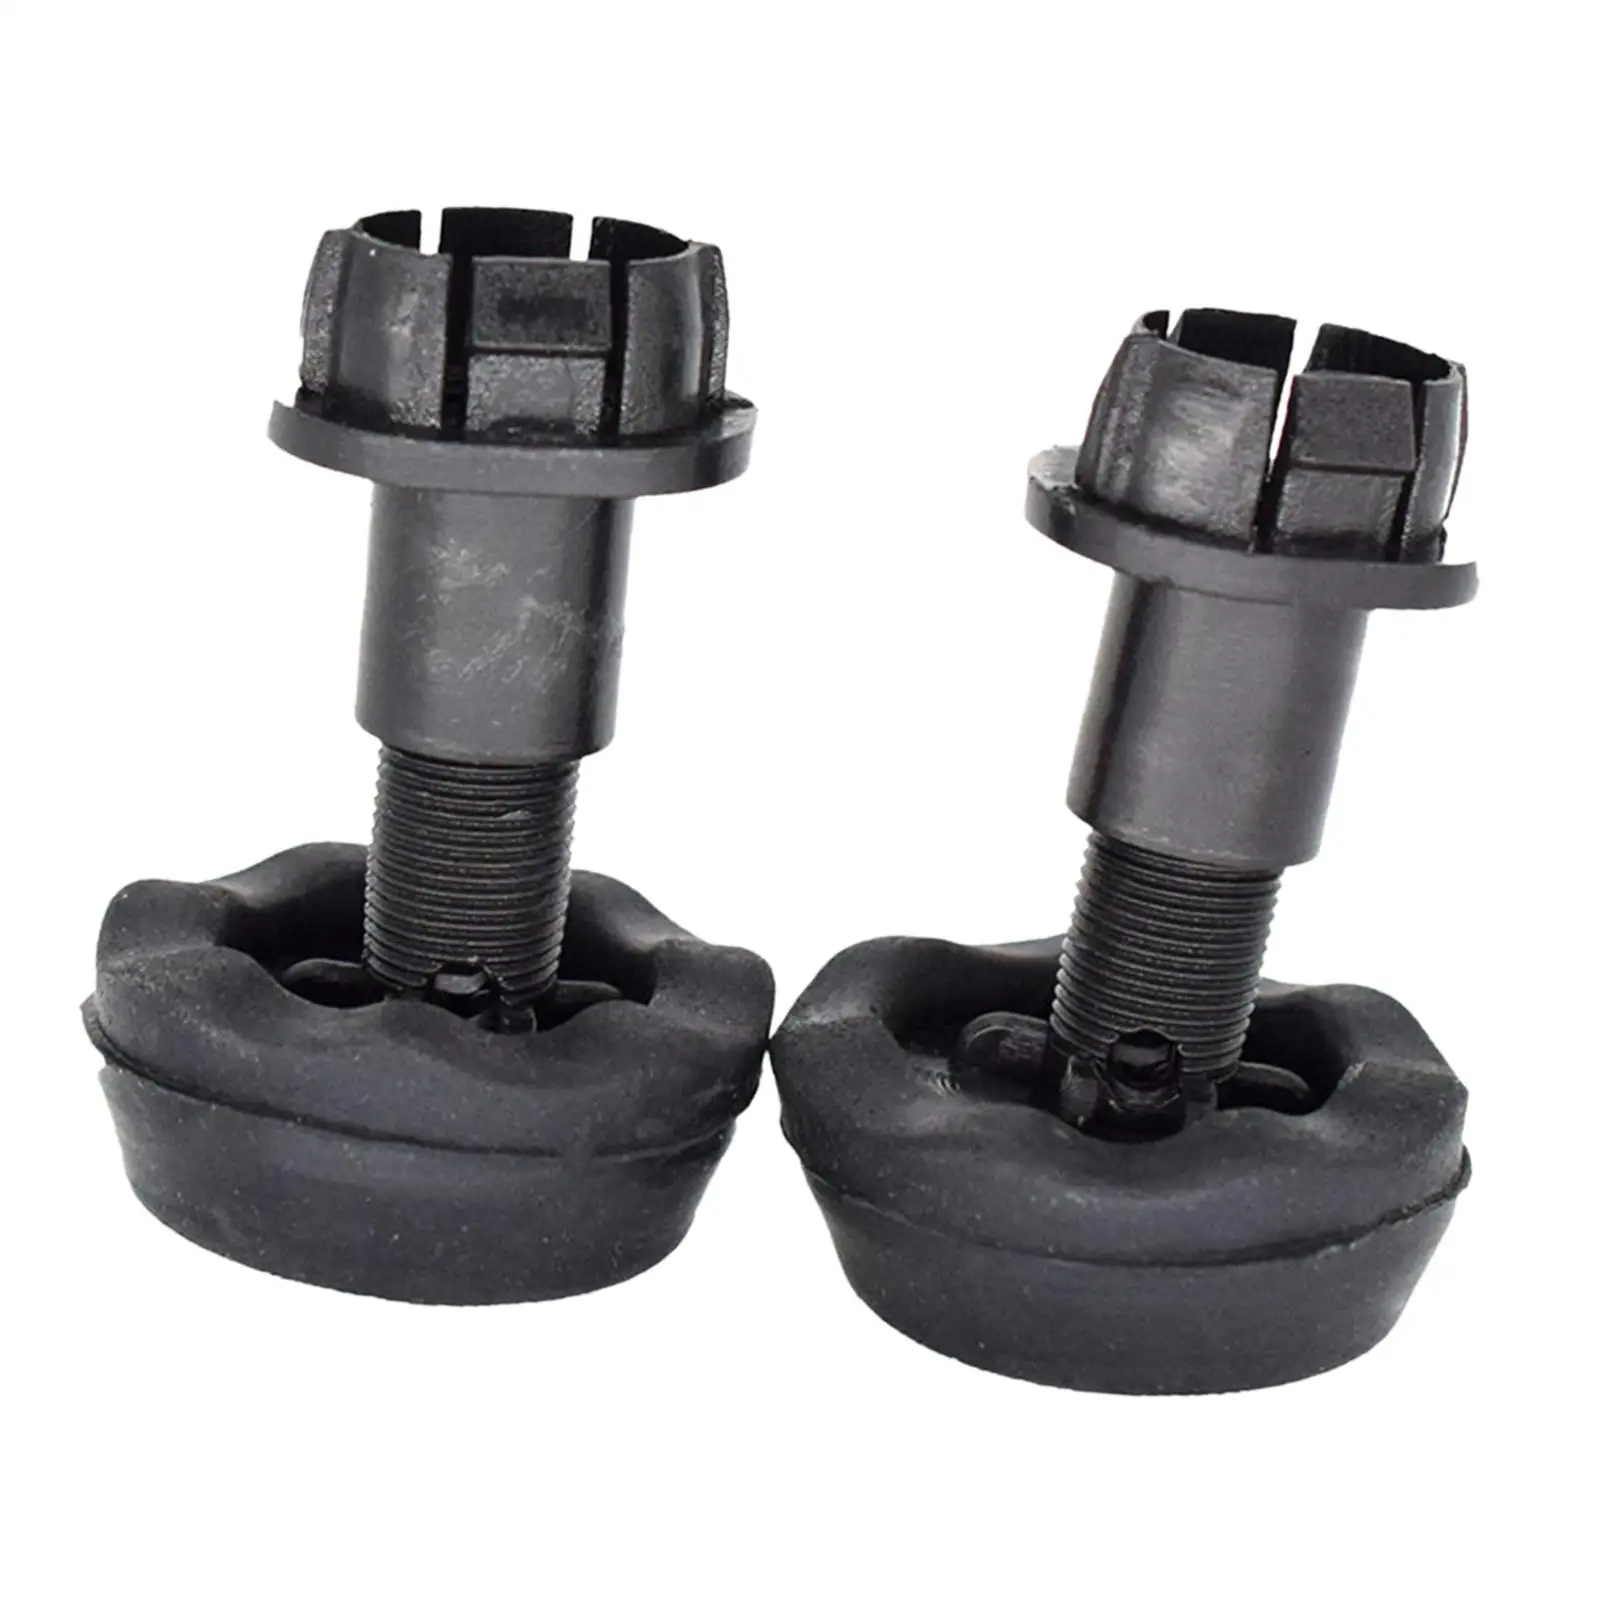 2x Durable Engine Cover Buffer Stop Cushion Accessories Auto for Mkc 2015-2019